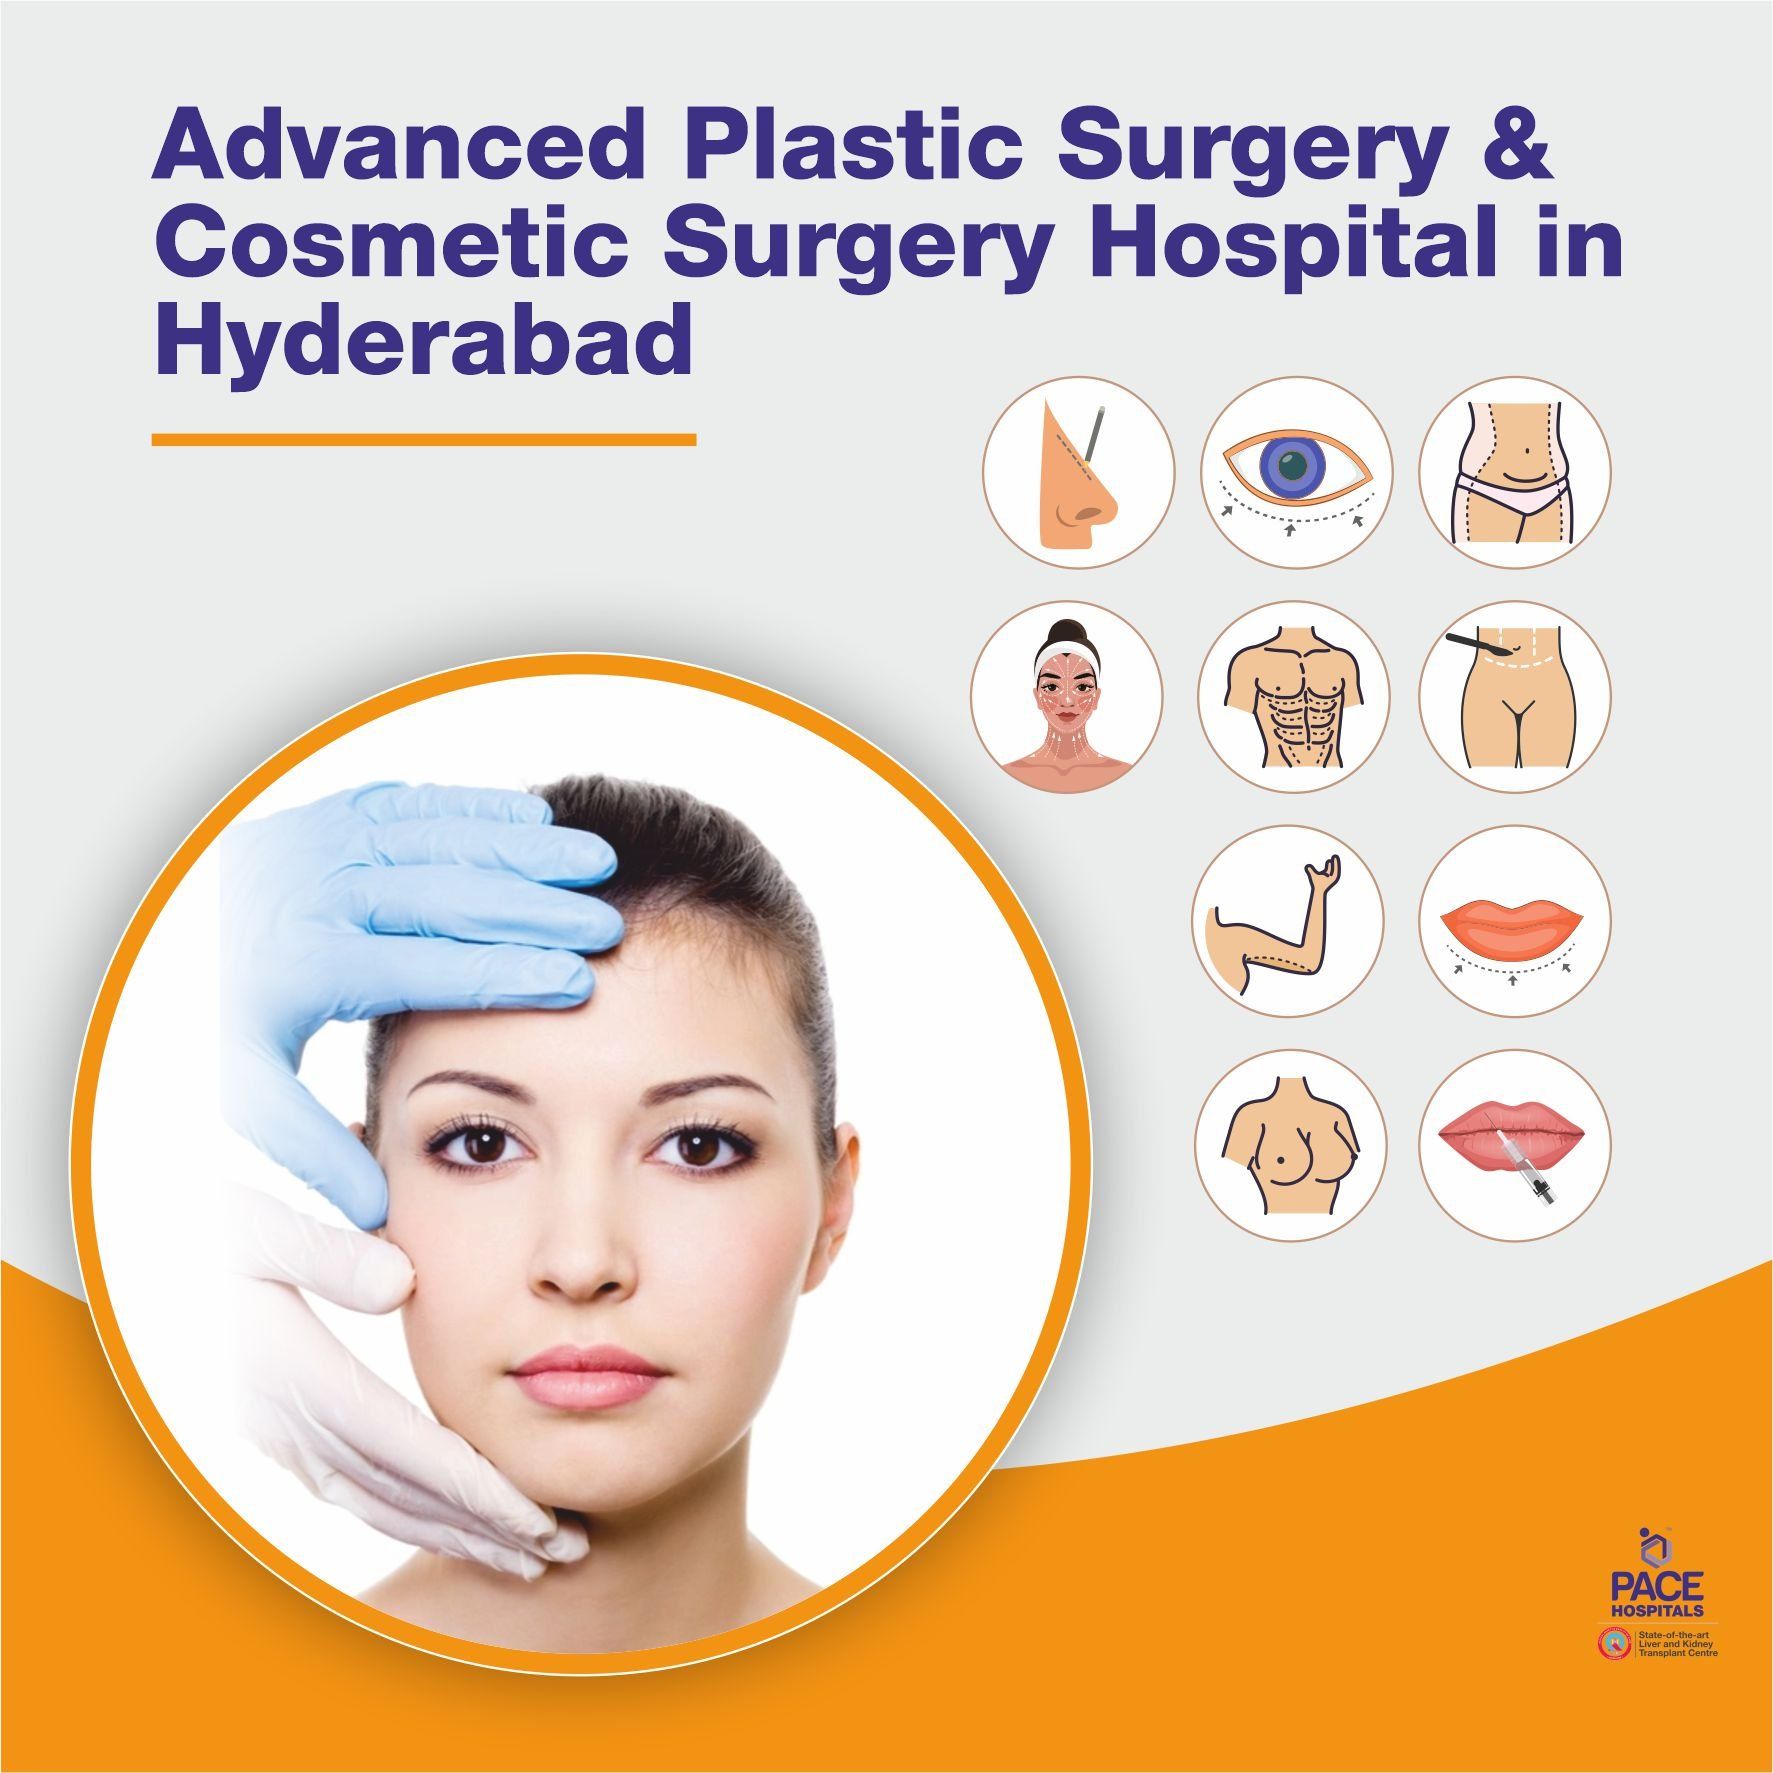 Advanced Plastic Surgery and Cosmetic Surgery Hospital in Hyderabad